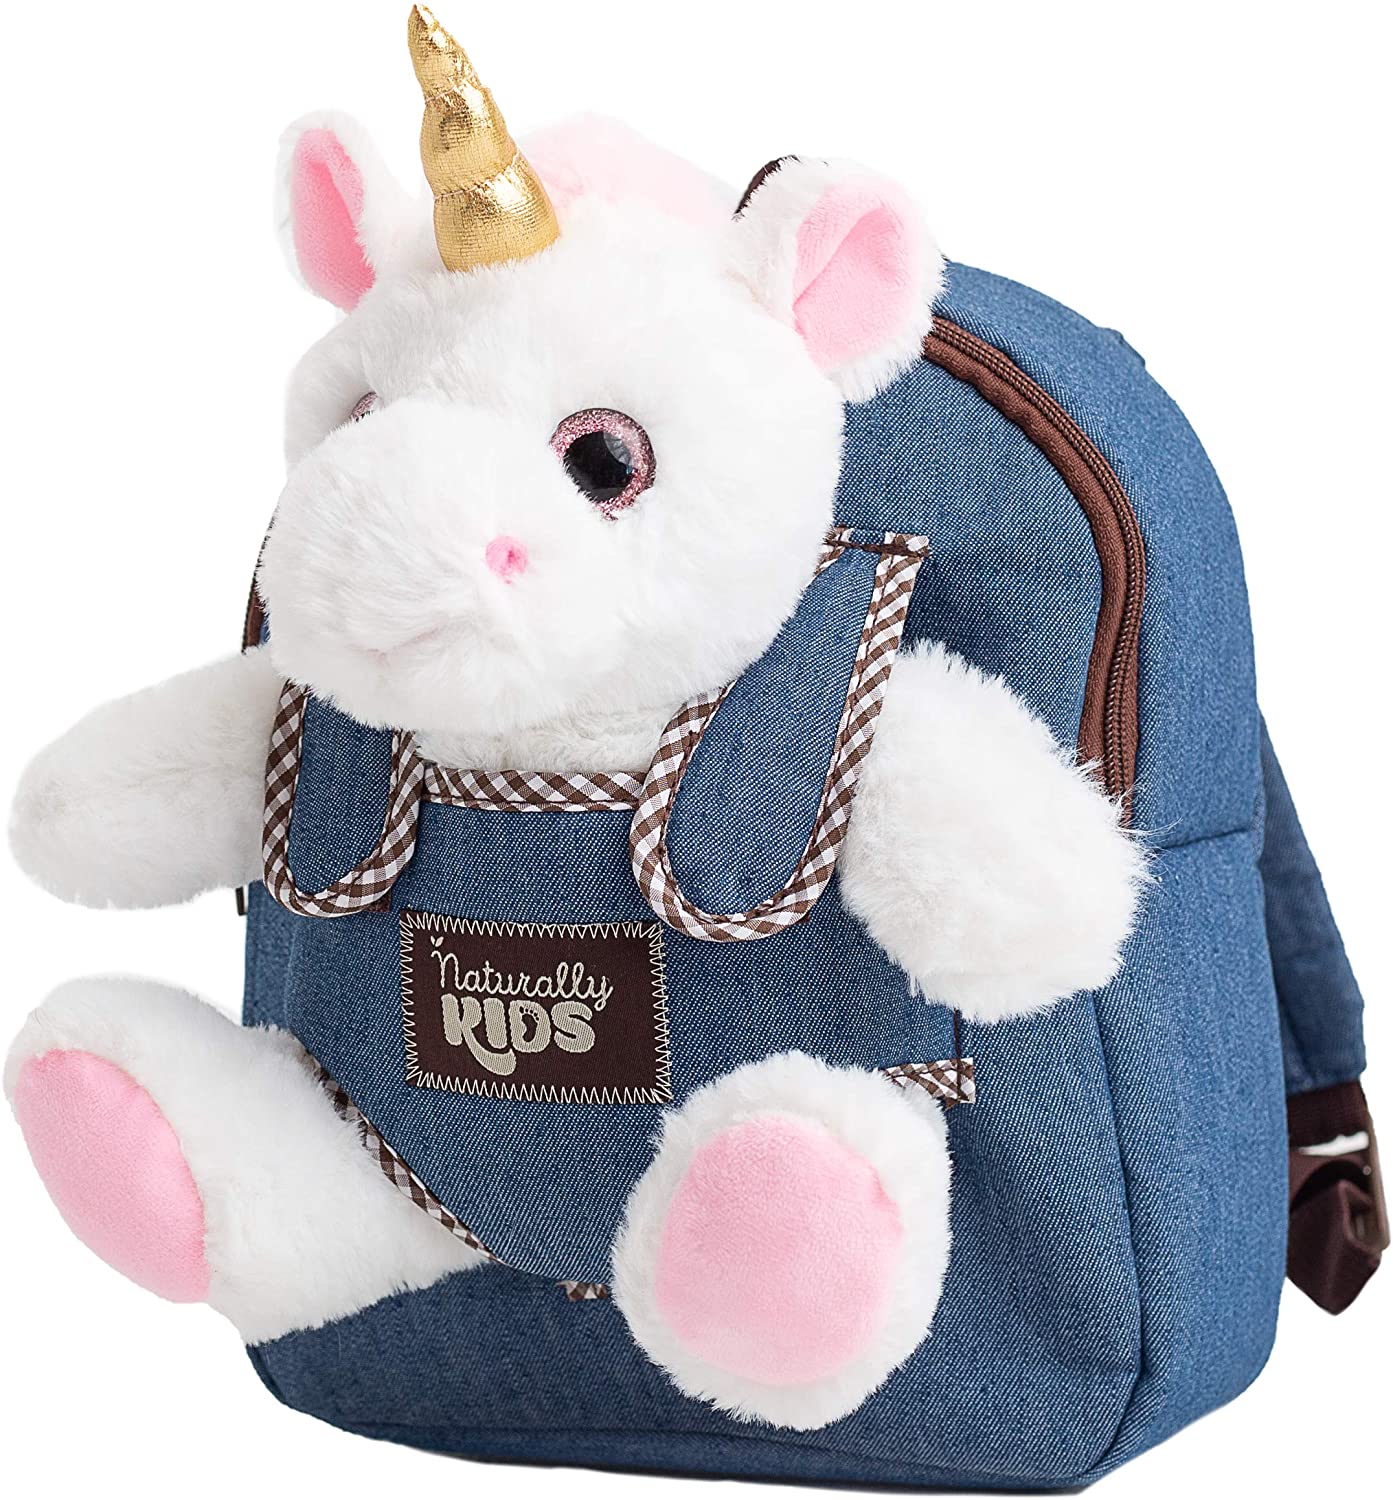 Naturally KIDS Mini Unicorn Backpack 5-Year-Old Girl’s Gifts